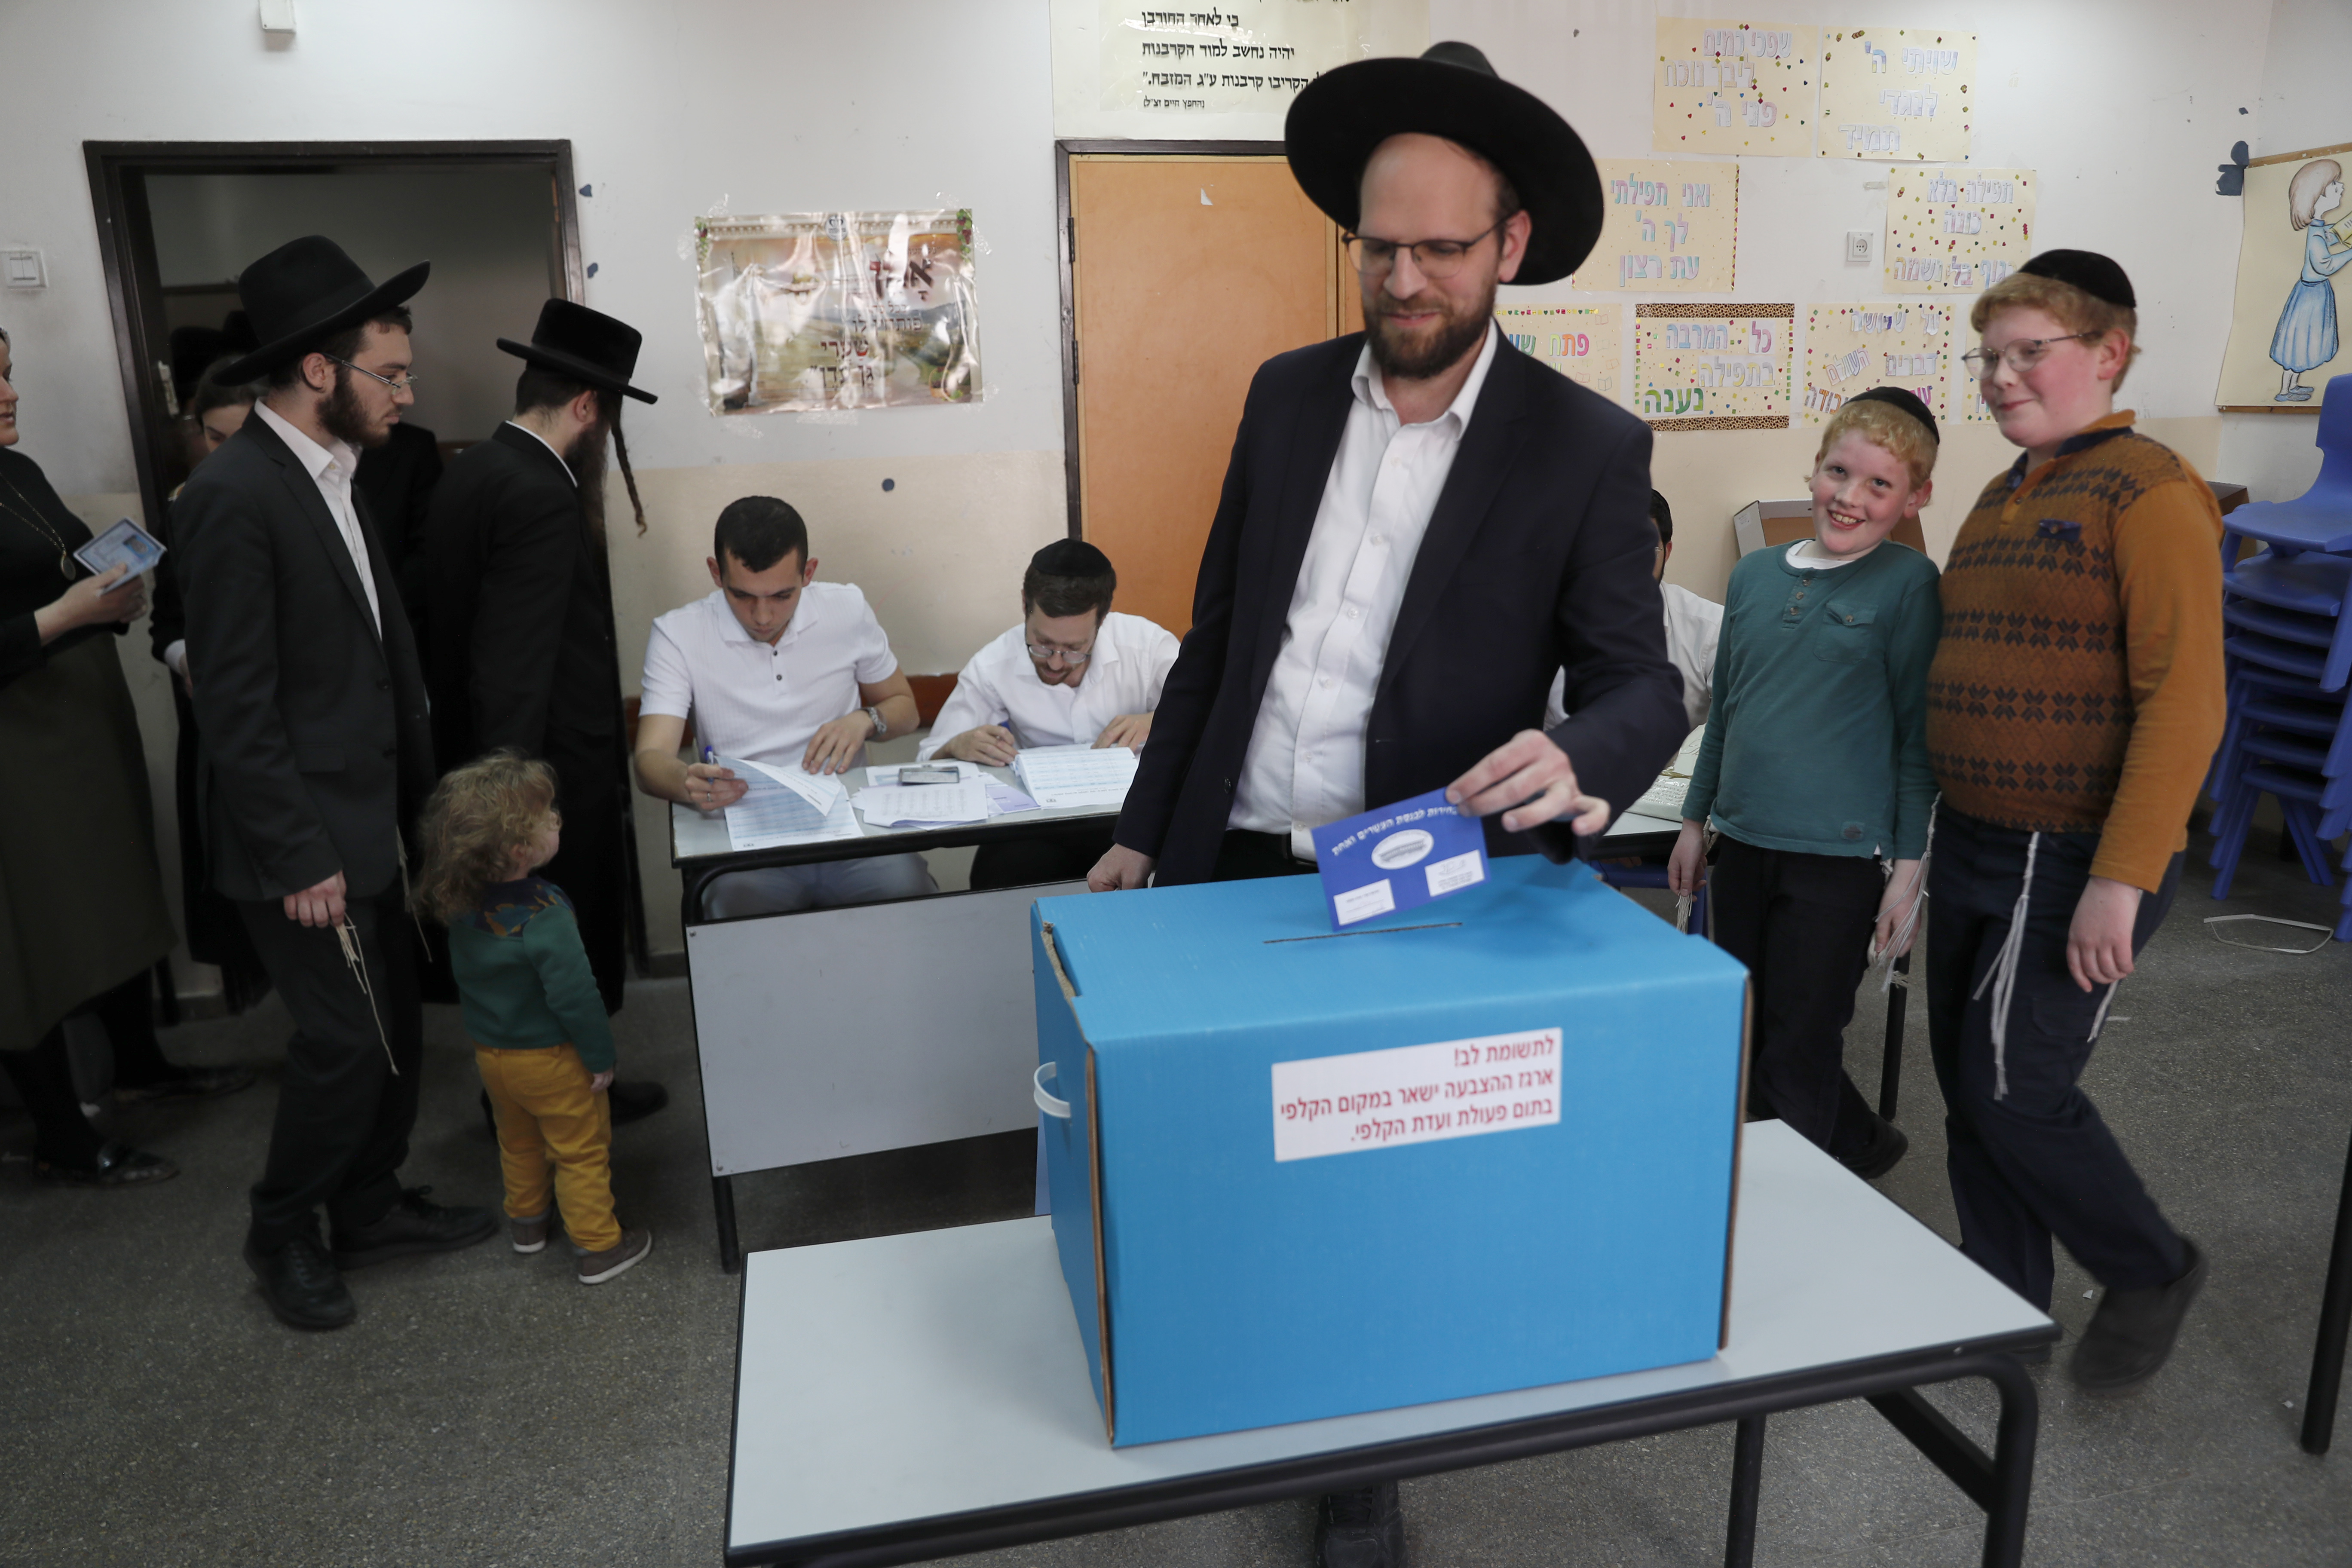 An Israeli Jewish man casts his vote at a polling station during the Elections of the 21st Knesset (parliament) of Israel, in the city of Bnie Brak, near Tel Aviv, 09 April 2019. EPA